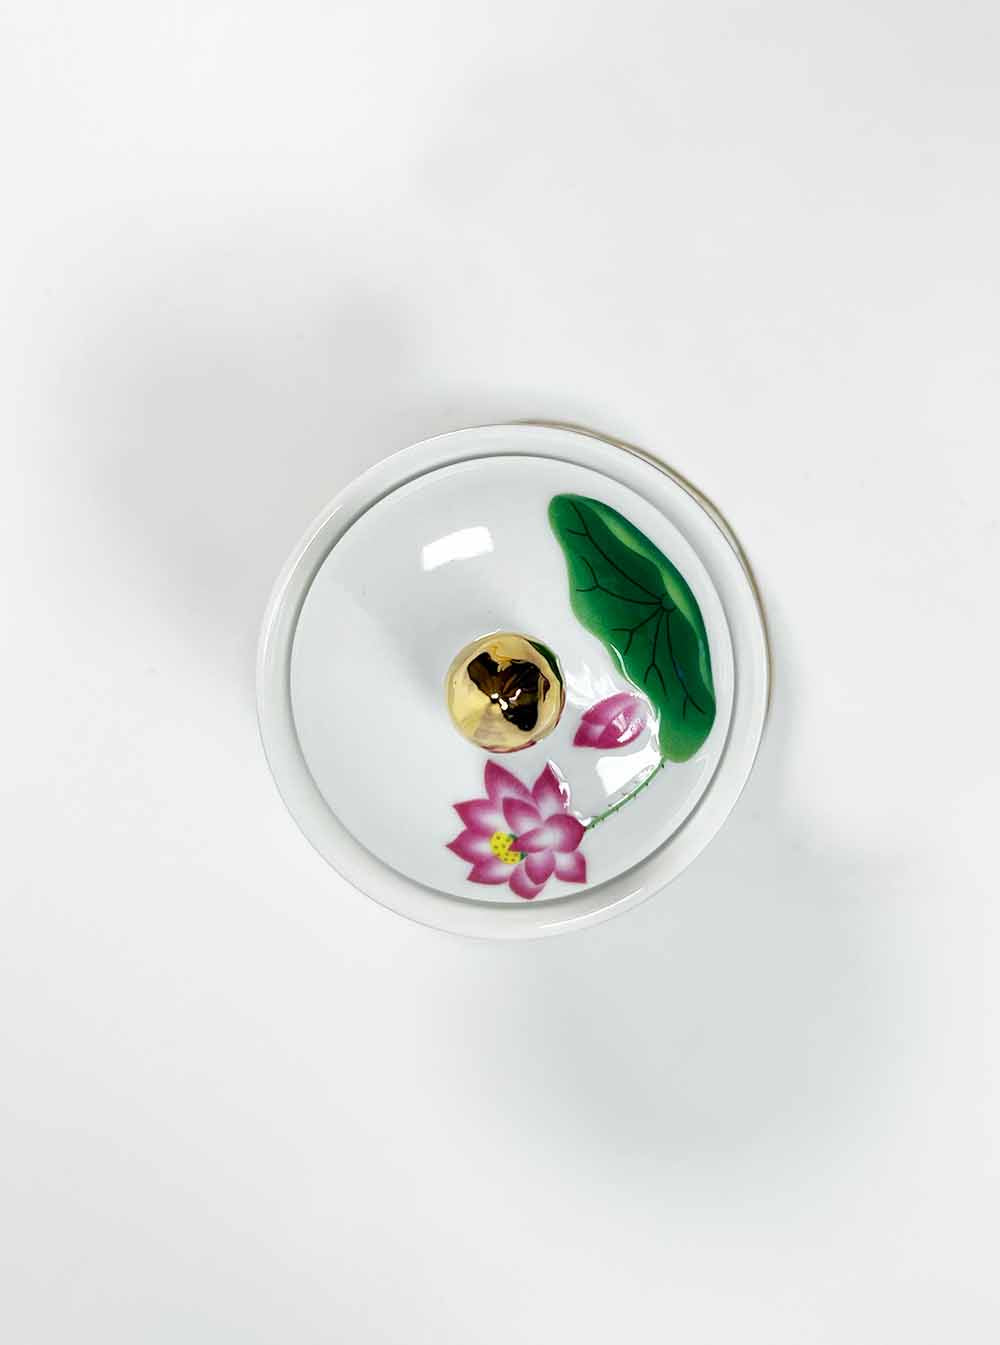 Pink Lotus with Lily Pad Offering Cup